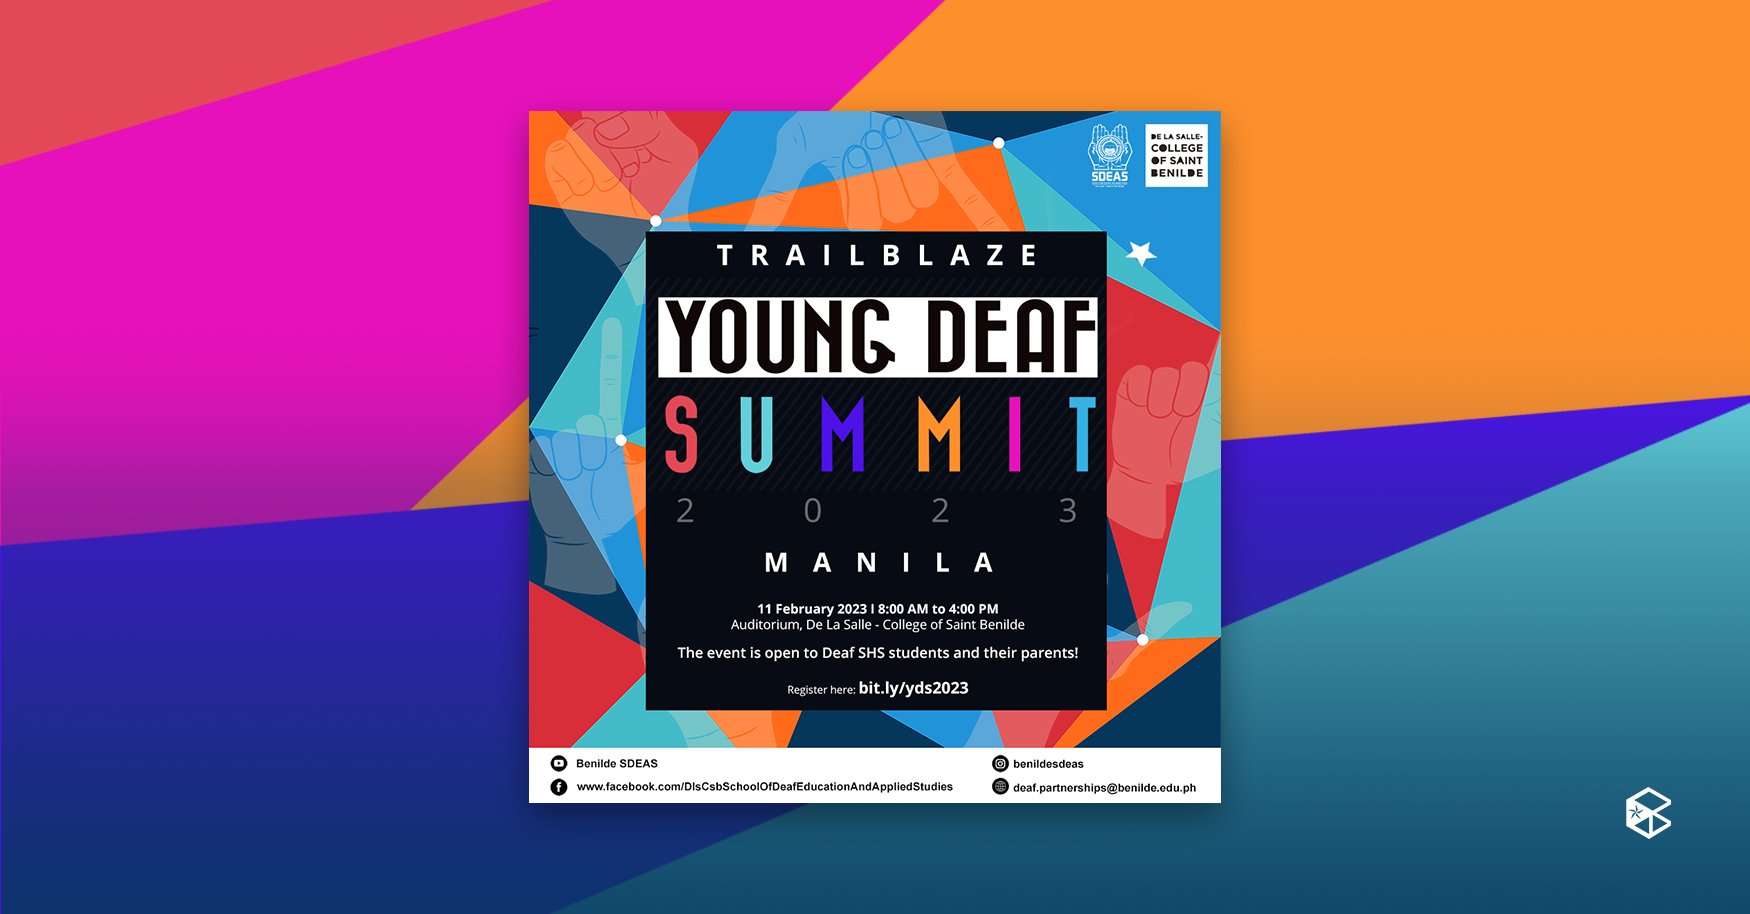 Photo From Benilde School Of Deaf And Applied Studies (sdeas) ; Layout By Maia Martin